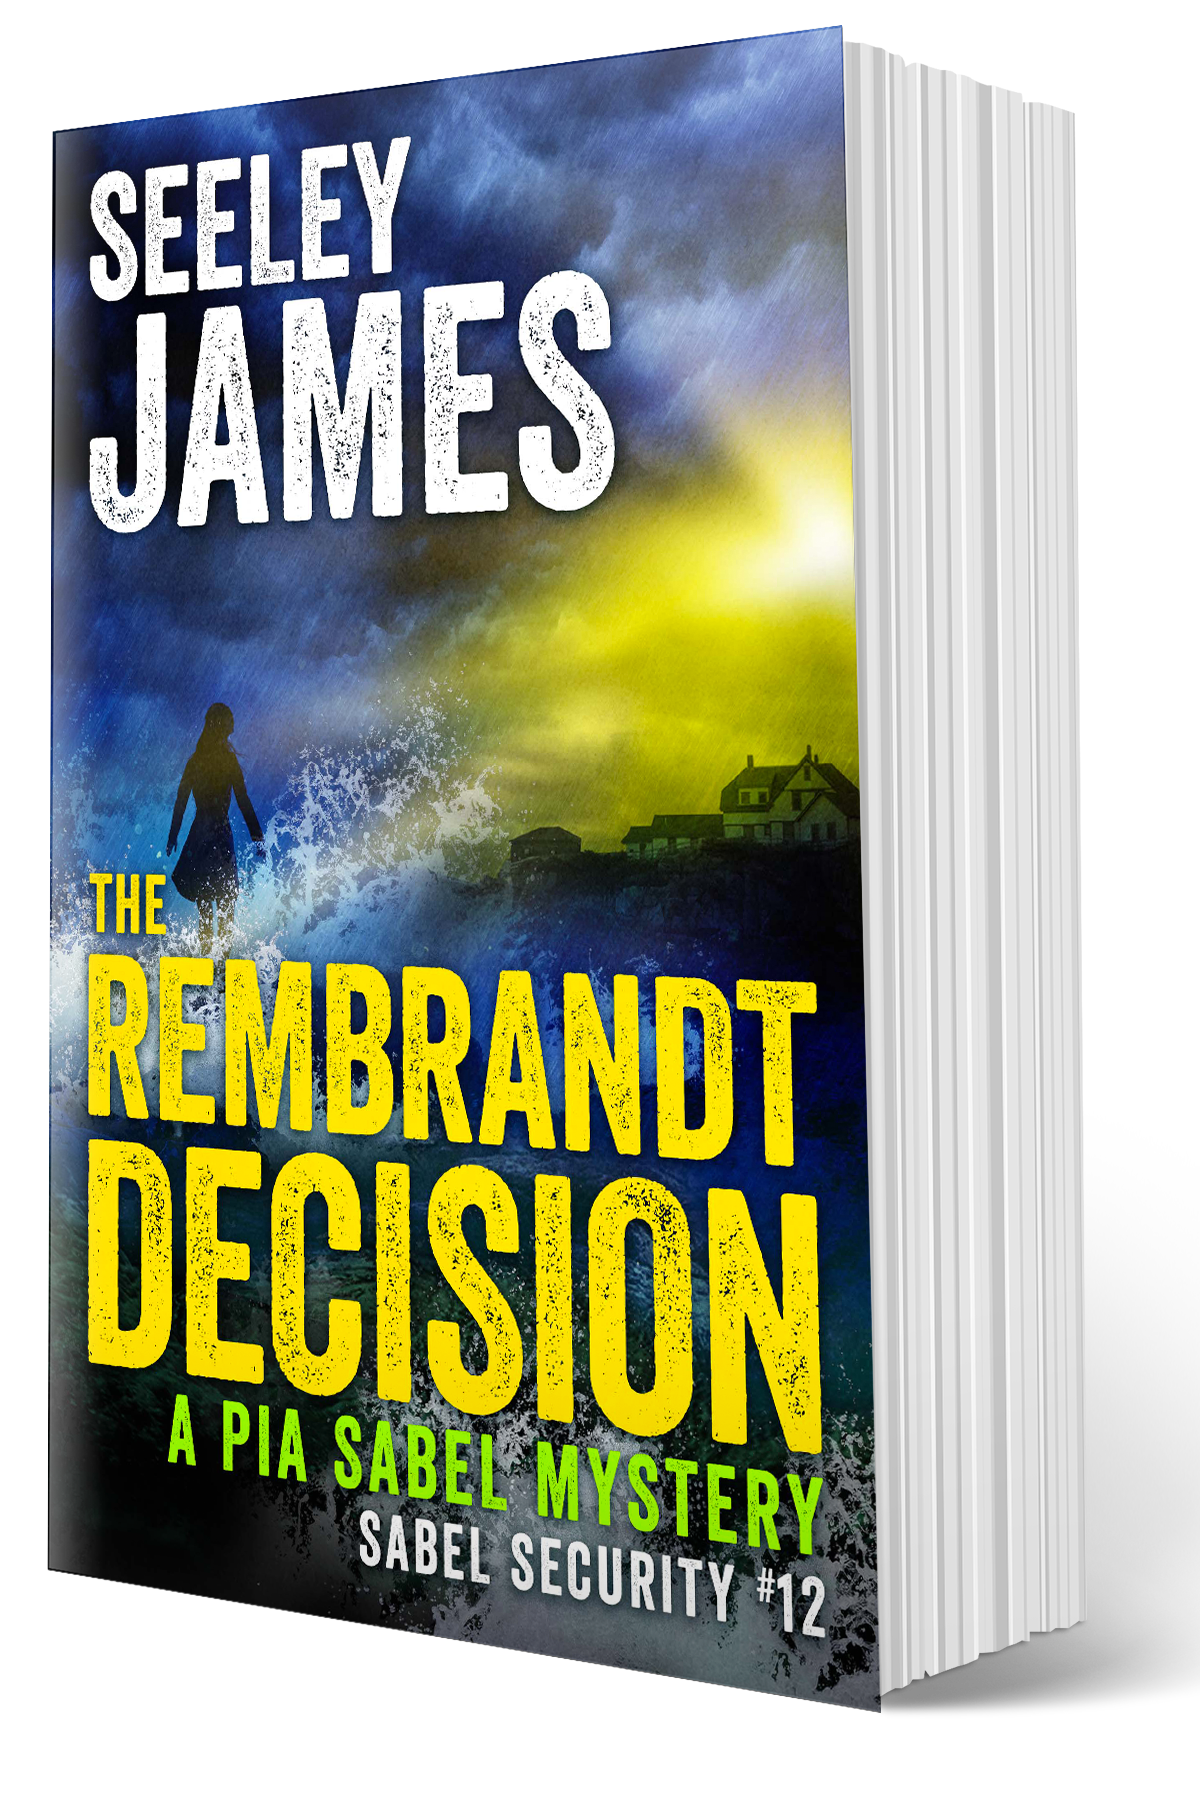 The Rembrandt Decision: A Pia Sabel Mystery - Softcover